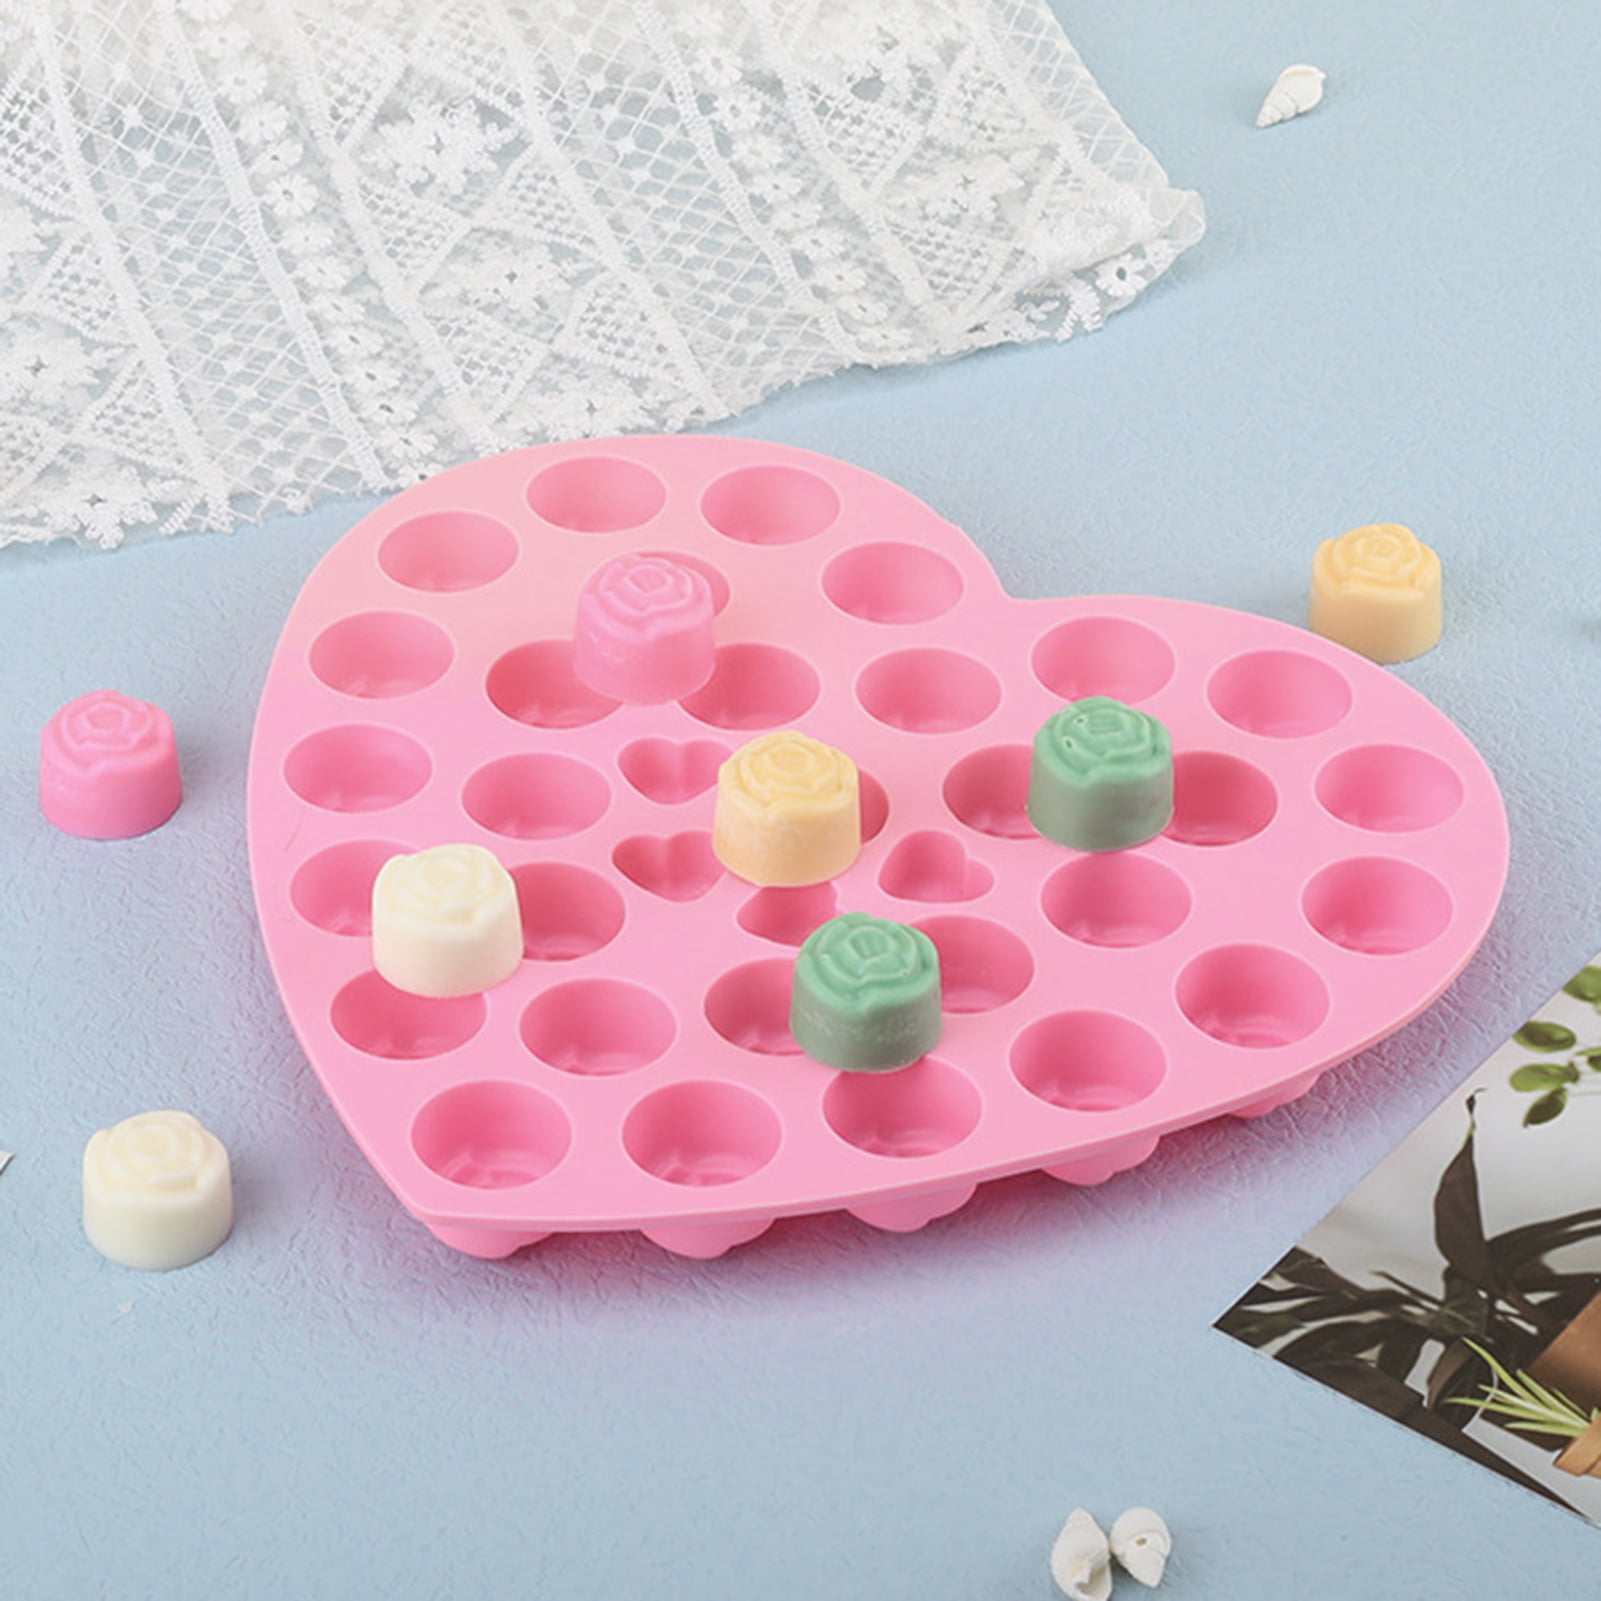 Genericaa 2 Pack Chocolate Silicone Molds Candy Mold, Rose Flower Shape Baking Mold Candy Molds BPA Free & Non-Stick Silicone Tray for Hard Candy Gummy Bomb